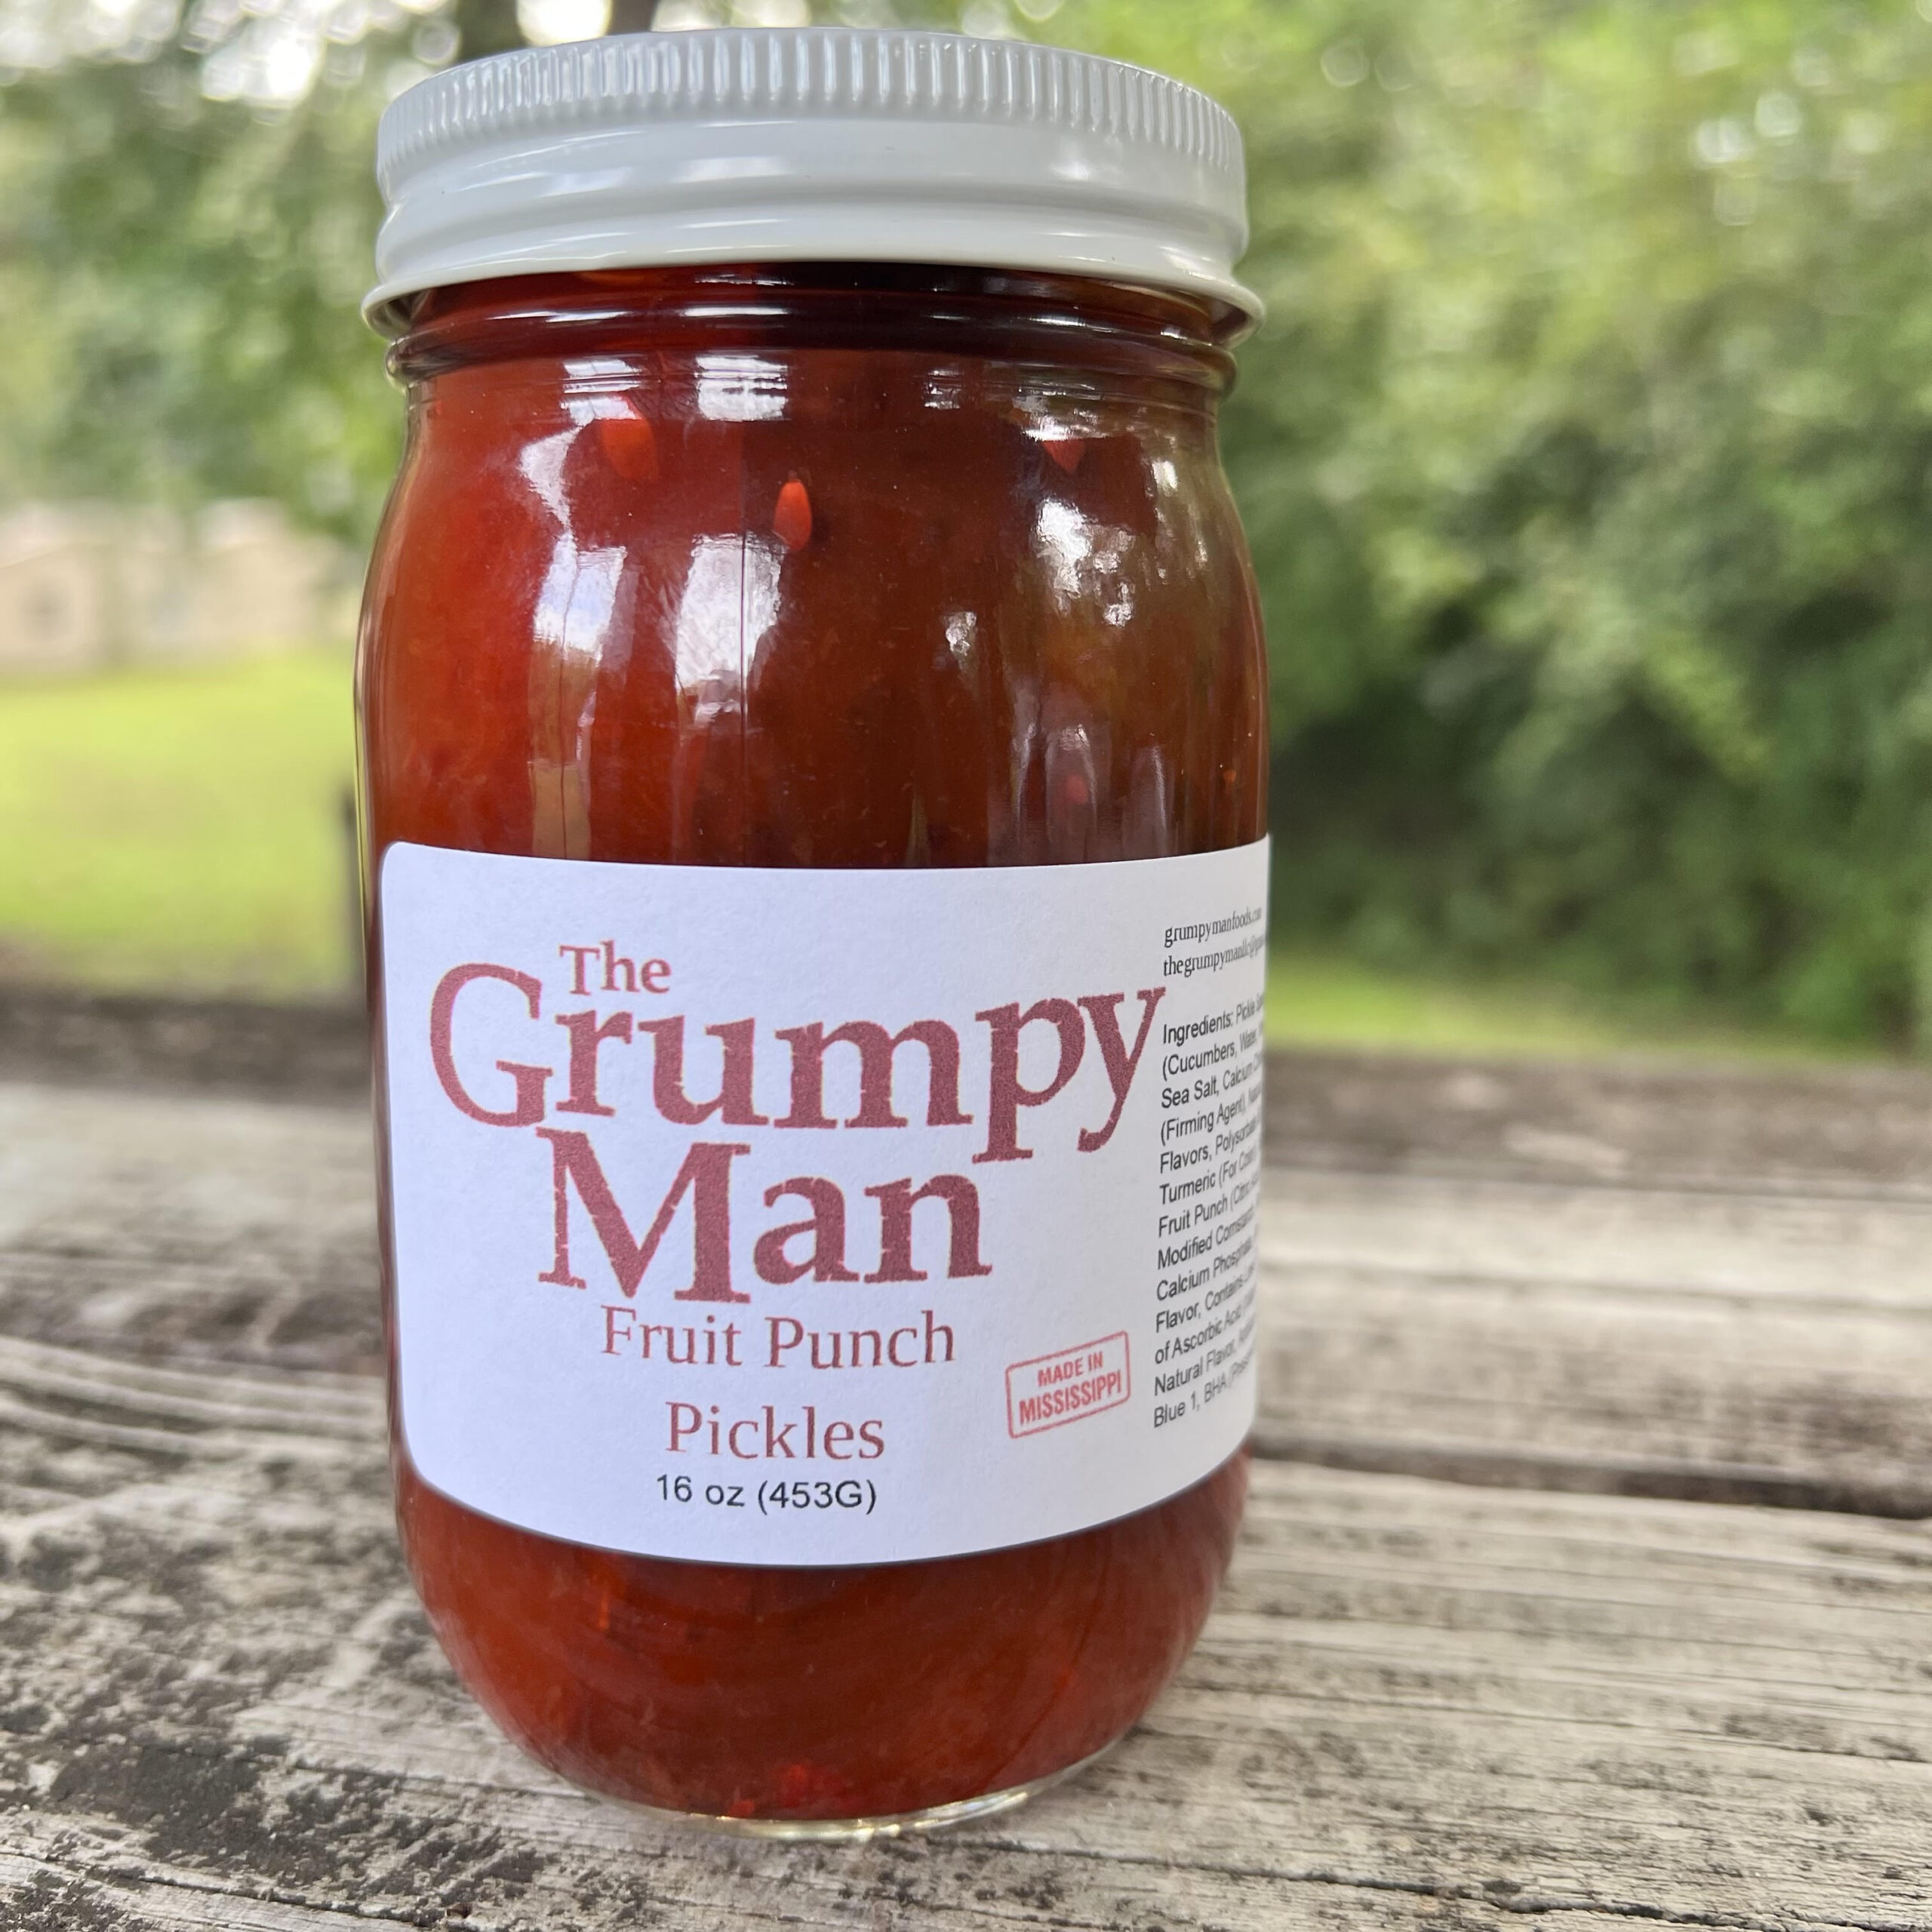 The Grumpy Man's Fruit Punch Pickles (Photo Credit: Atlas Obscura)